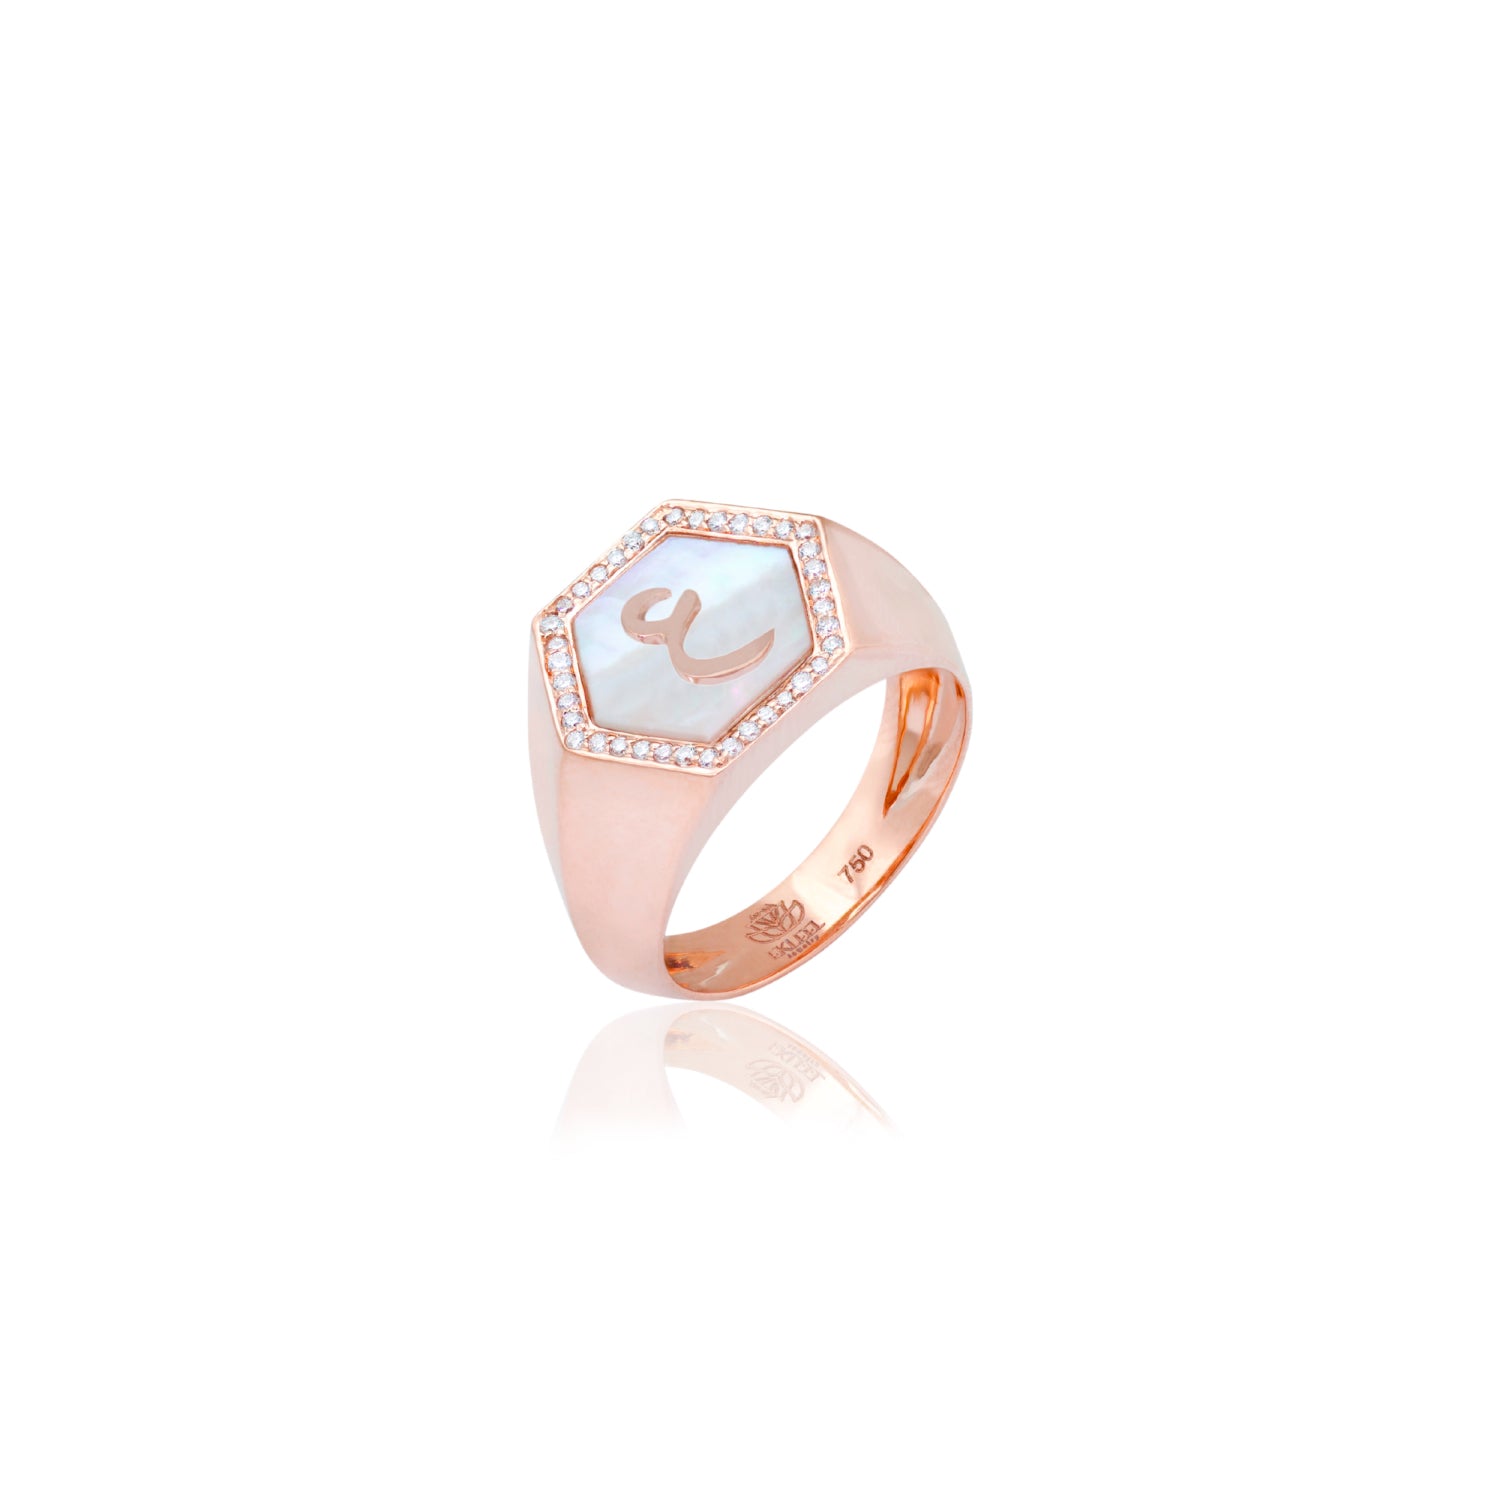 Qamoos 2.0 Letter ع White Mother of Pearl and Diamond Signet Ring in Rose Gold